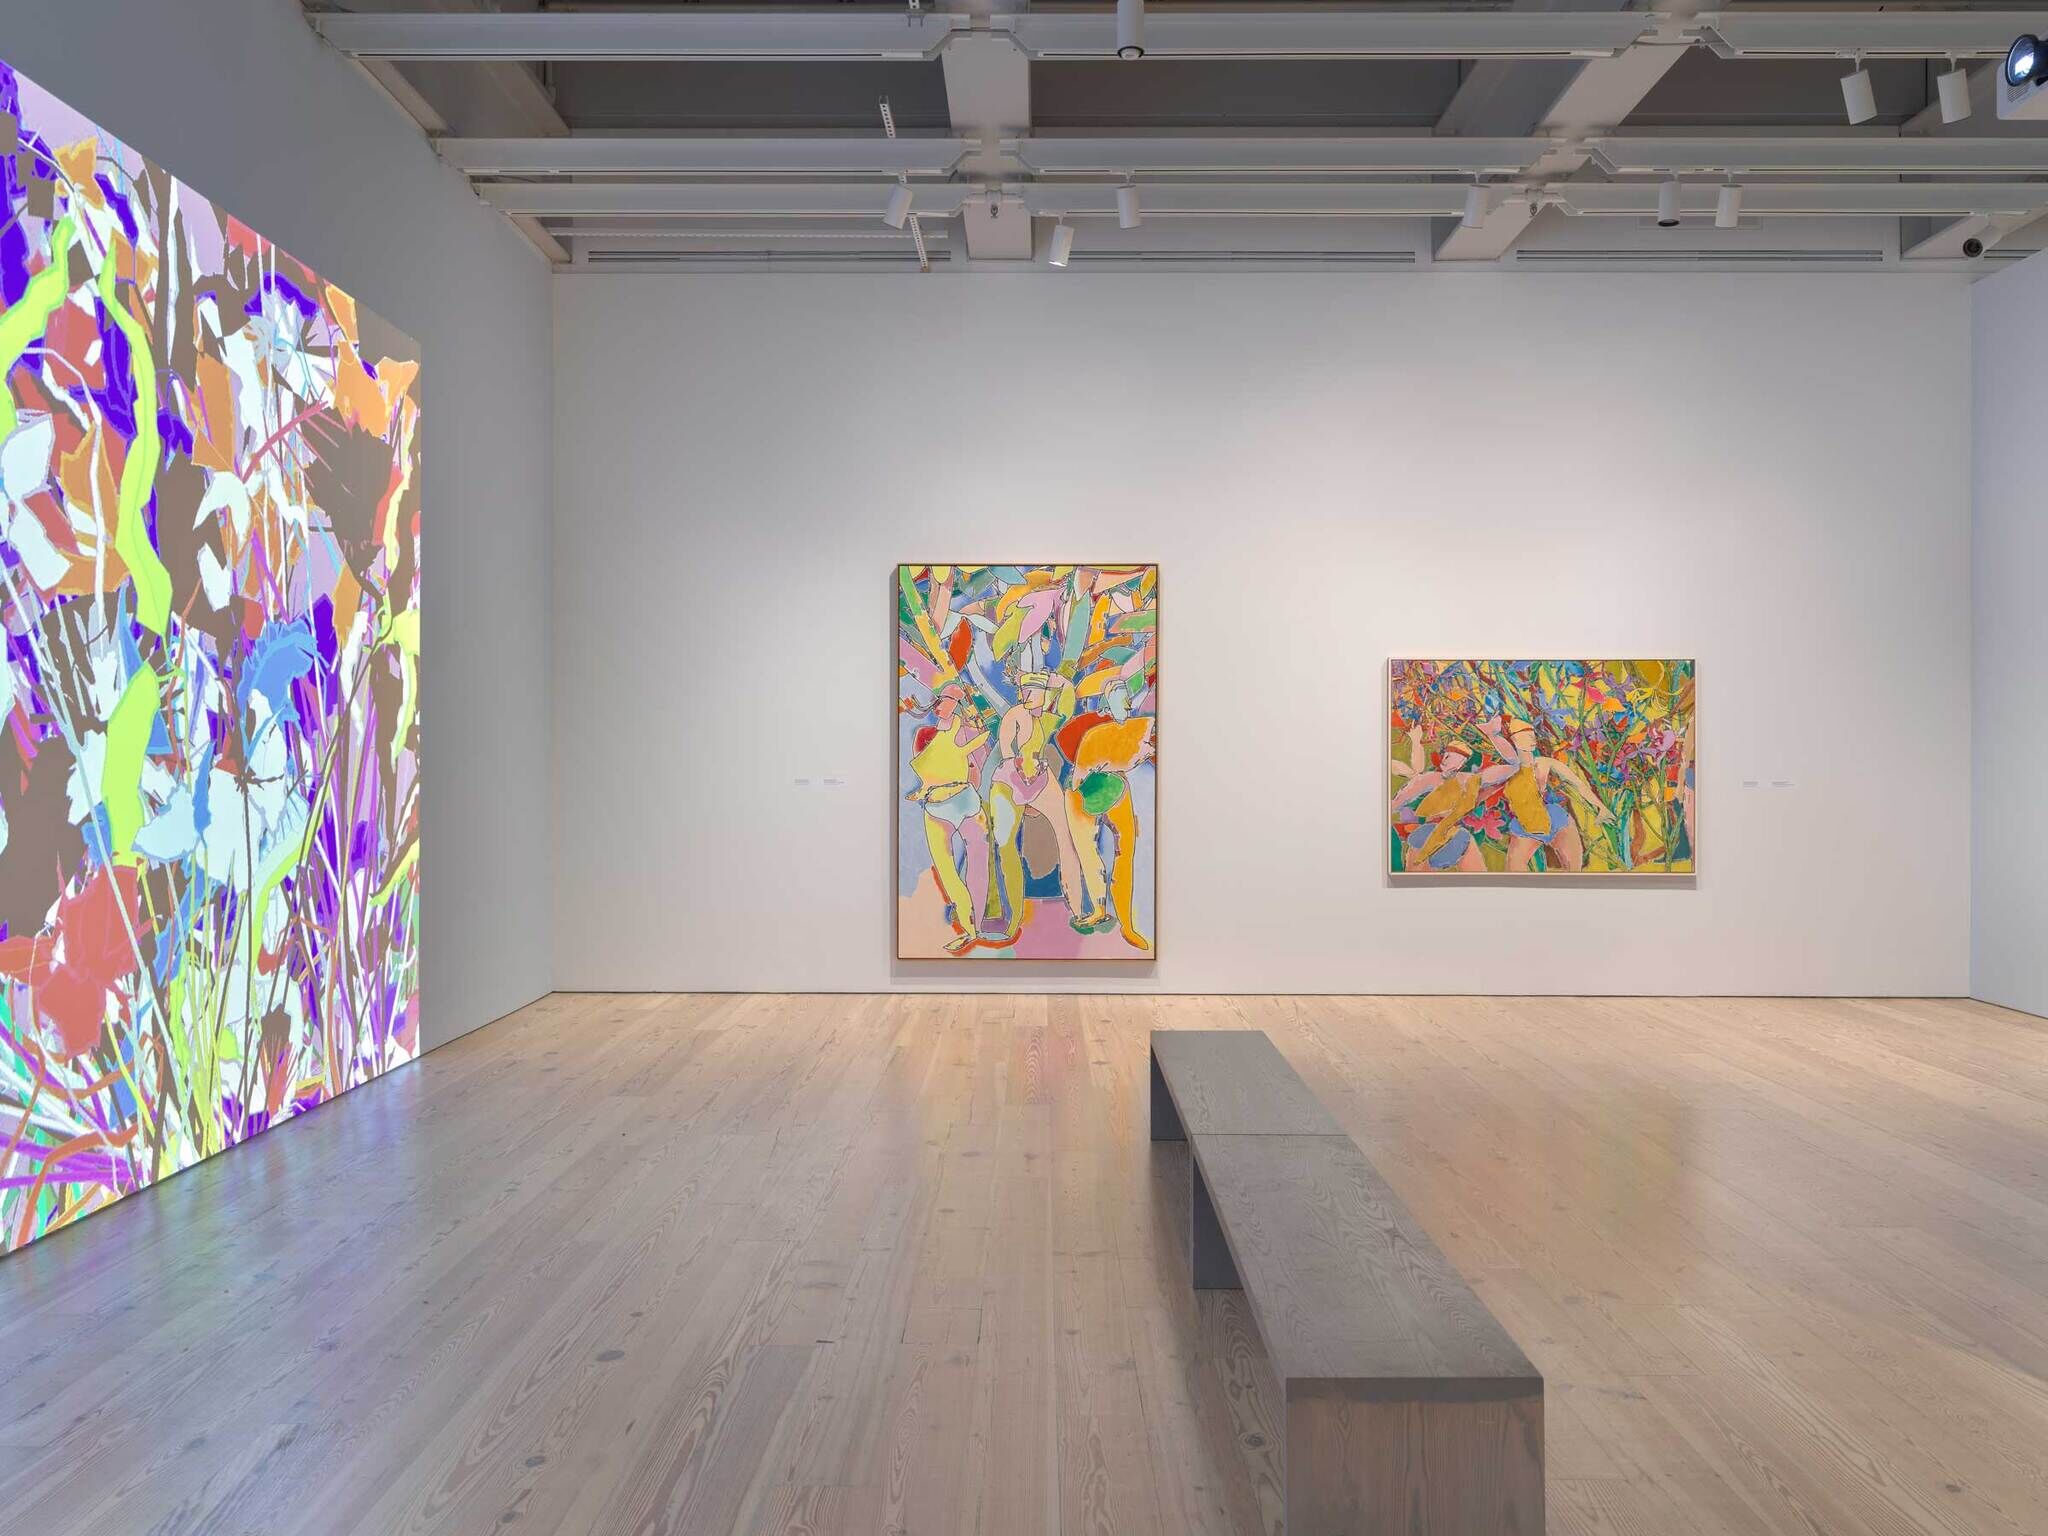 Modern art gallery interior with colorful abstract paintings on white walls and a wooden floor.